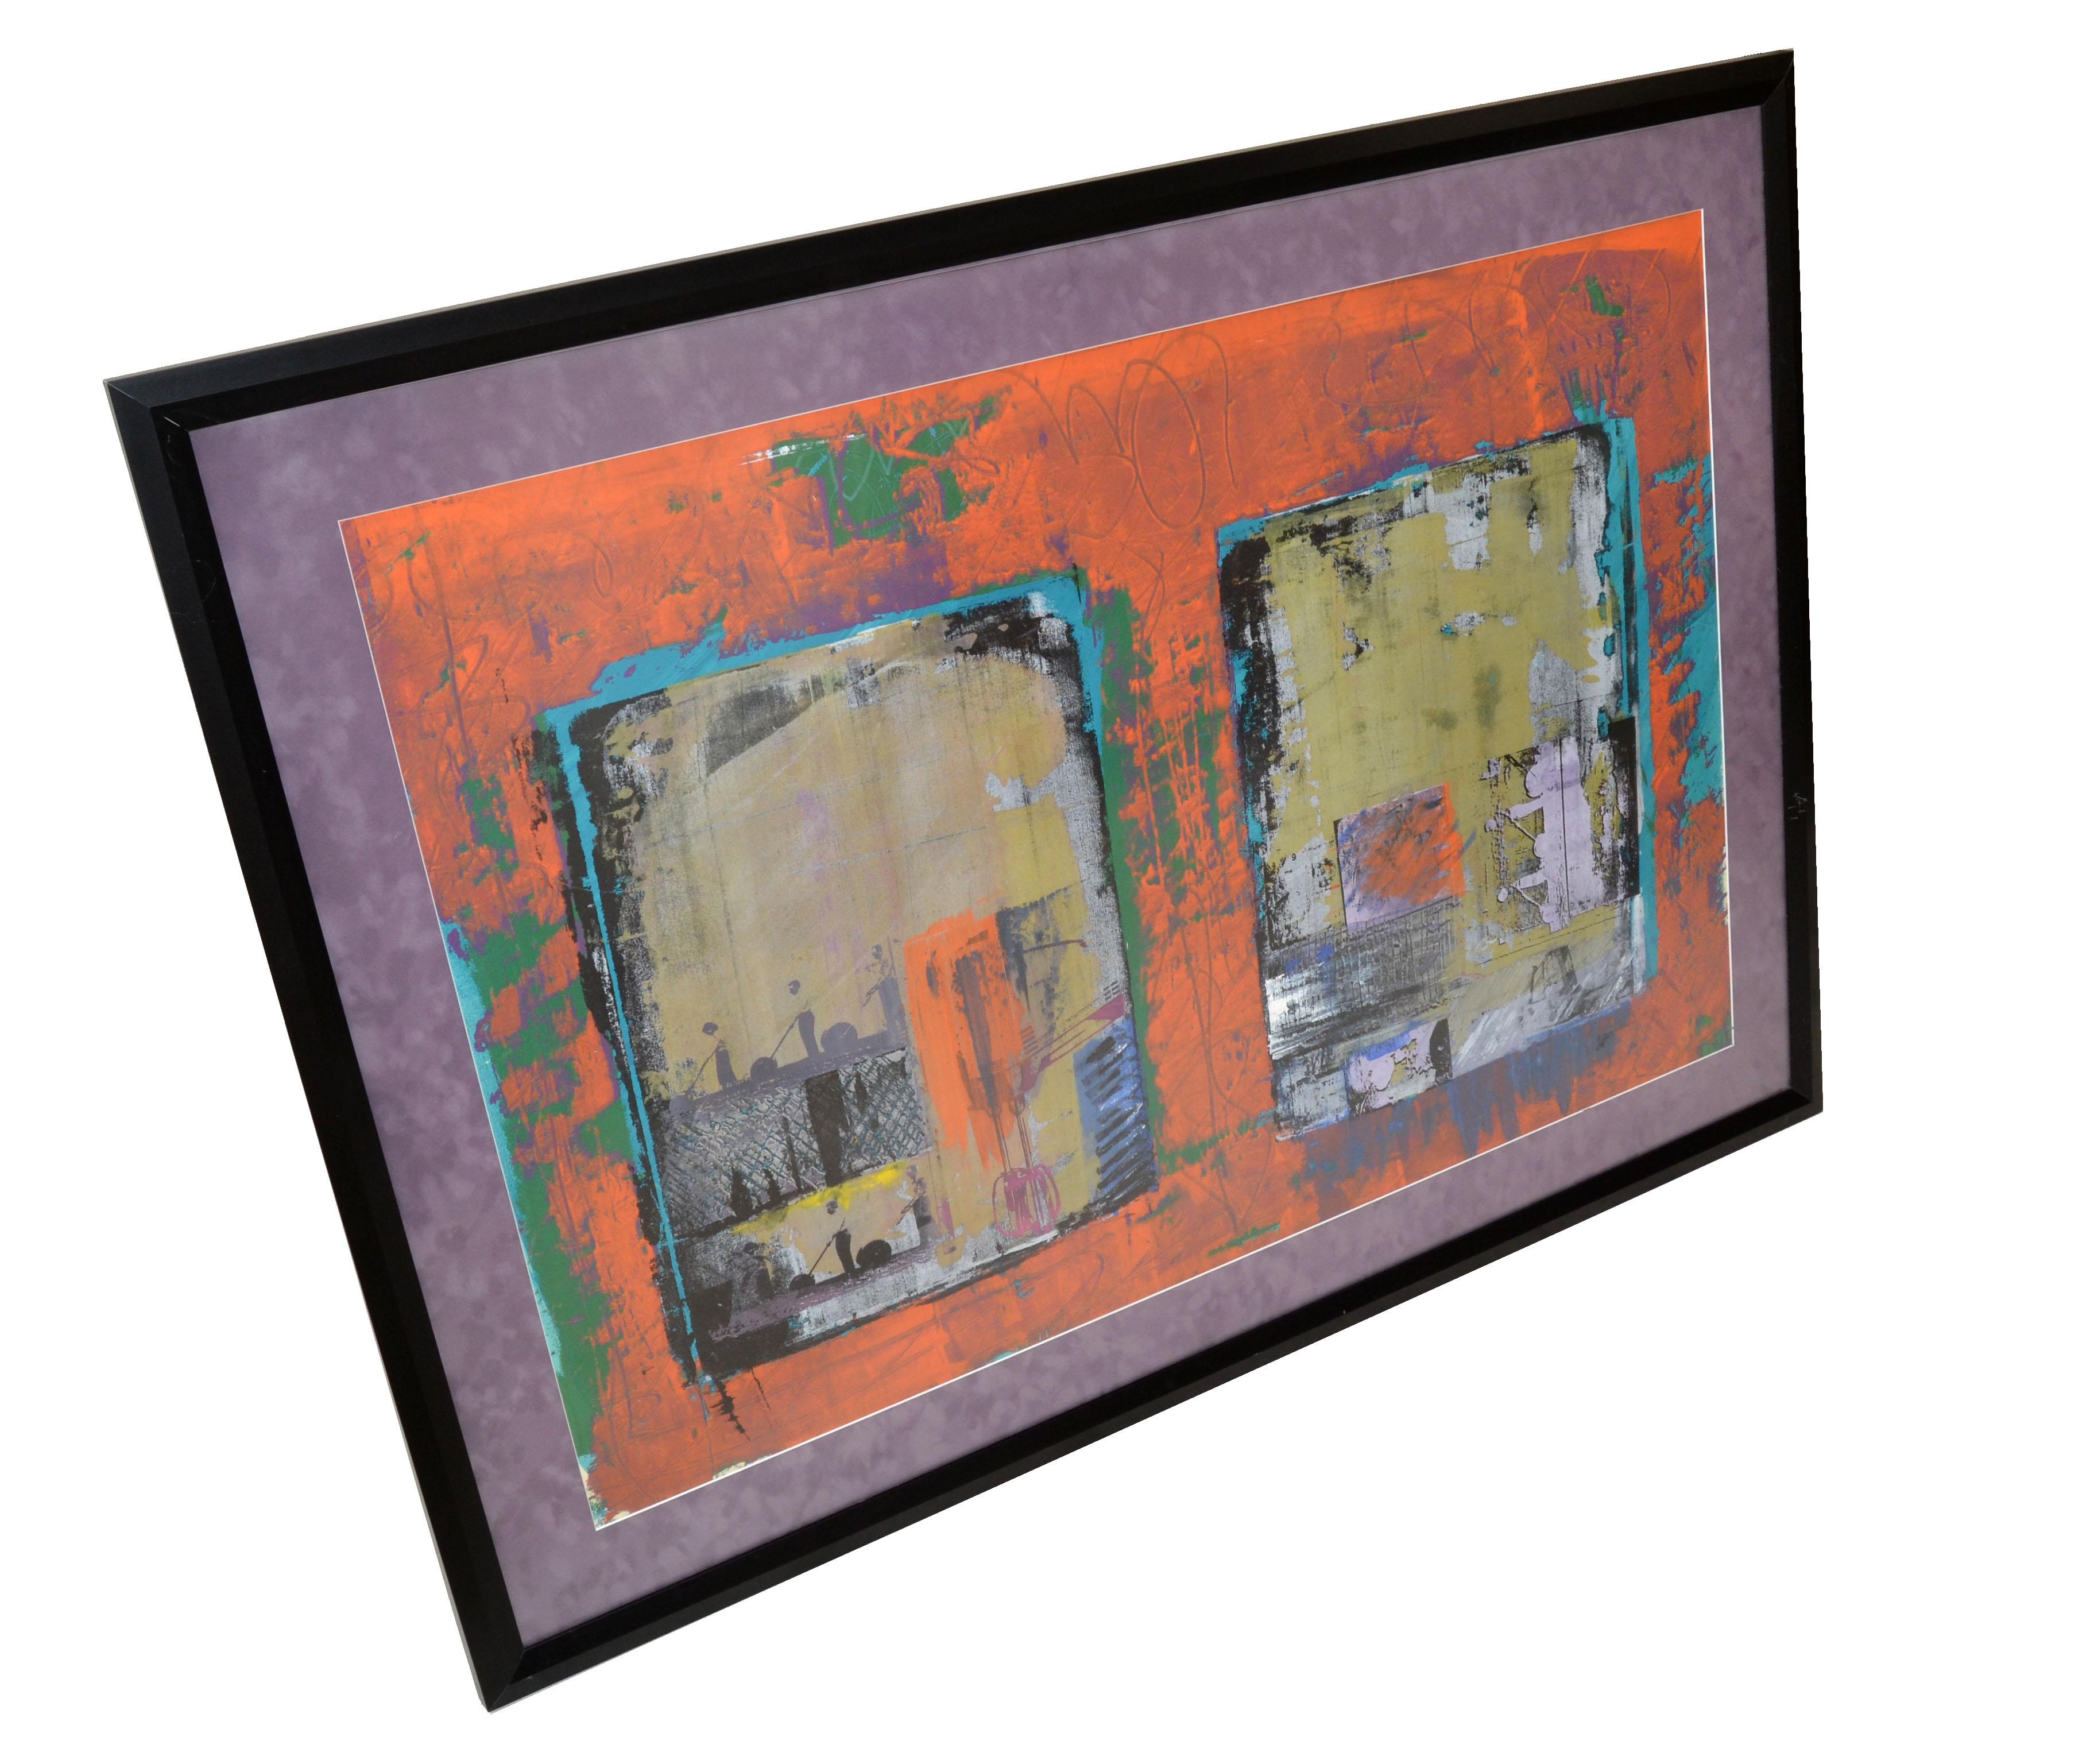 Unique abstract art on canvas, circa 1980s. 
Professionally framed and marked on the reverse.
Art Size: 39 x 27 inches.